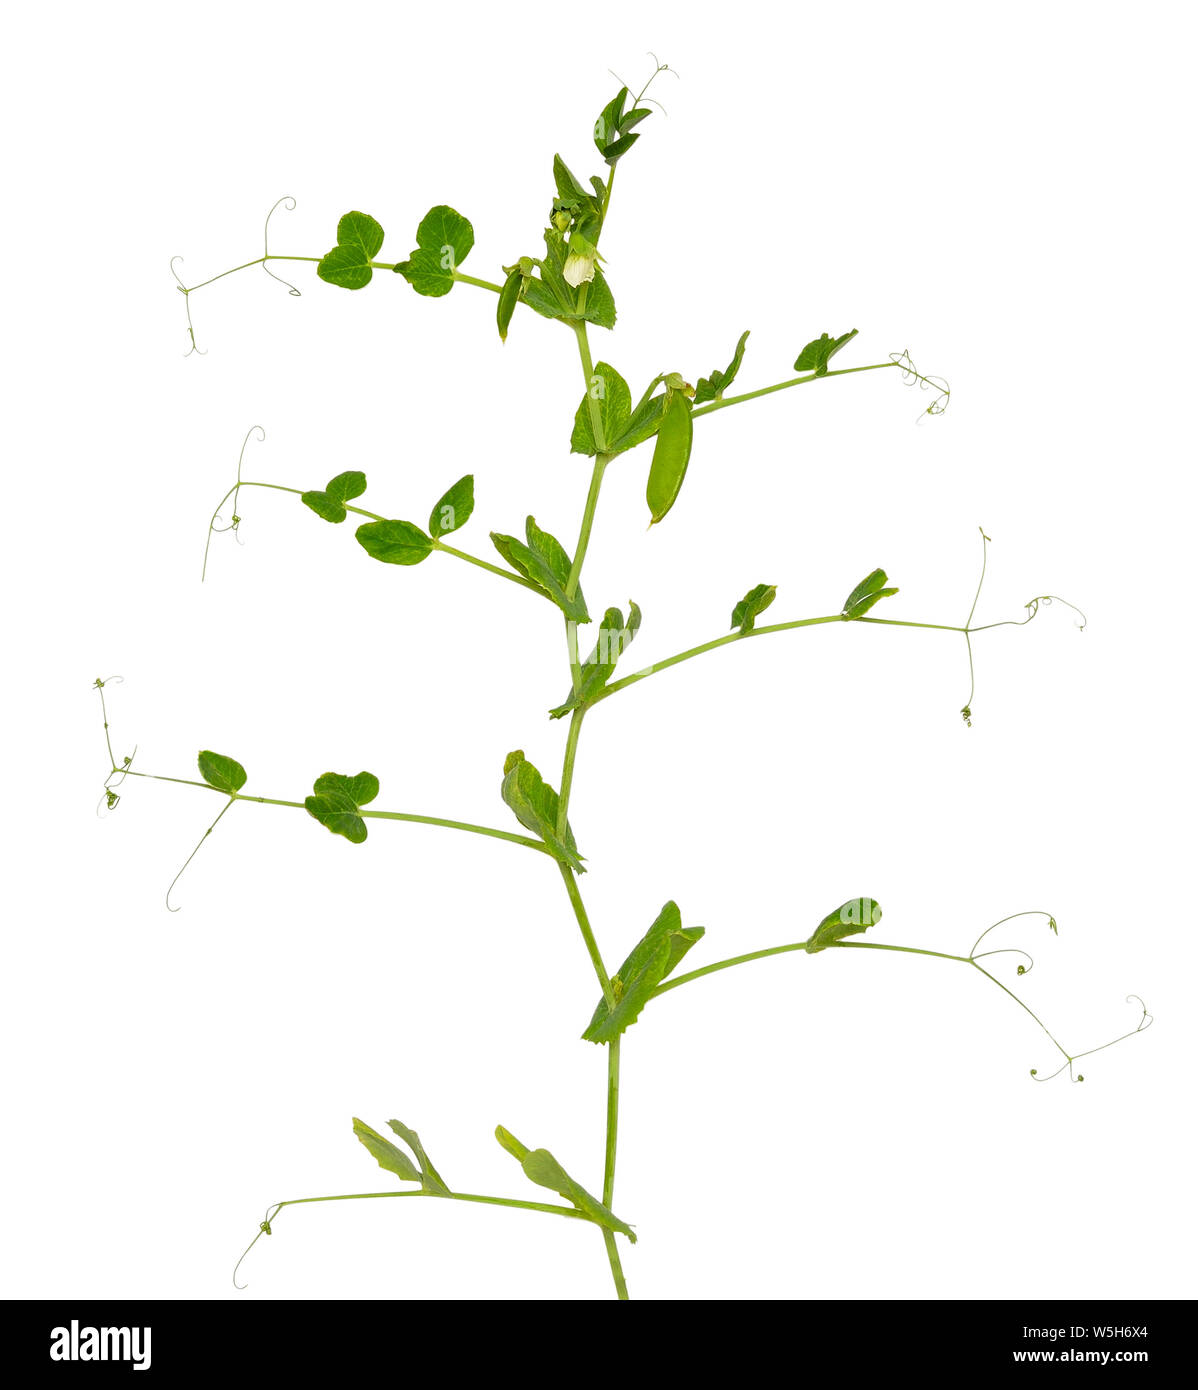 Branch of young green peas isolated on a white background Stock Photo